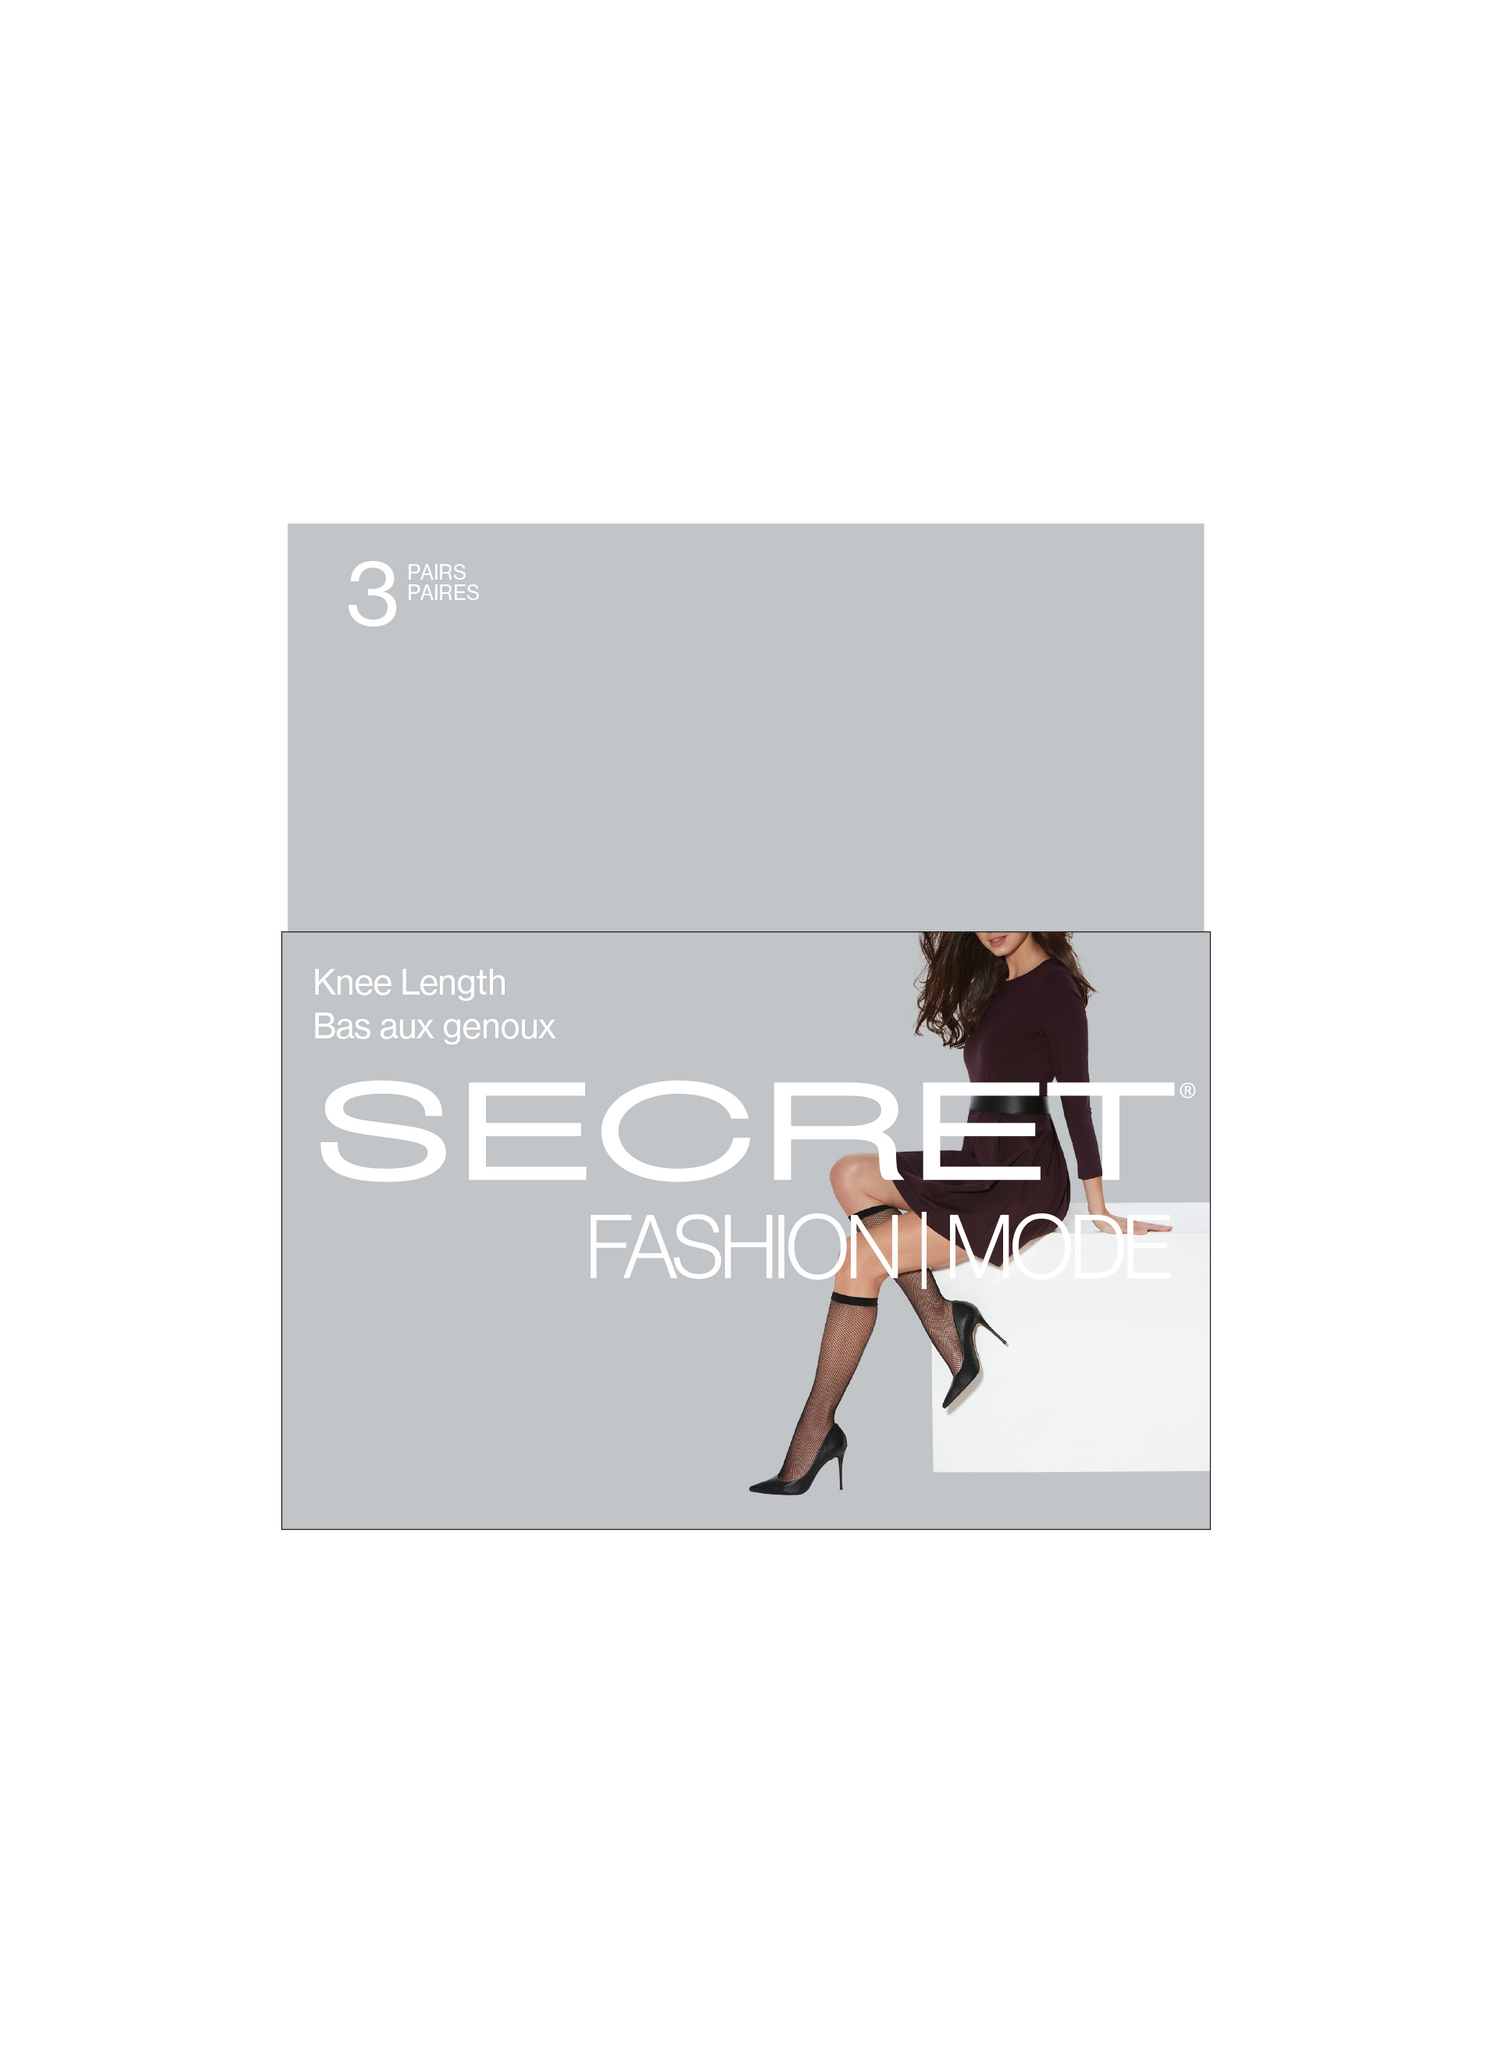 SECRET® - Knee Length - 1 Semi-opaque and 2 Fashion pairs